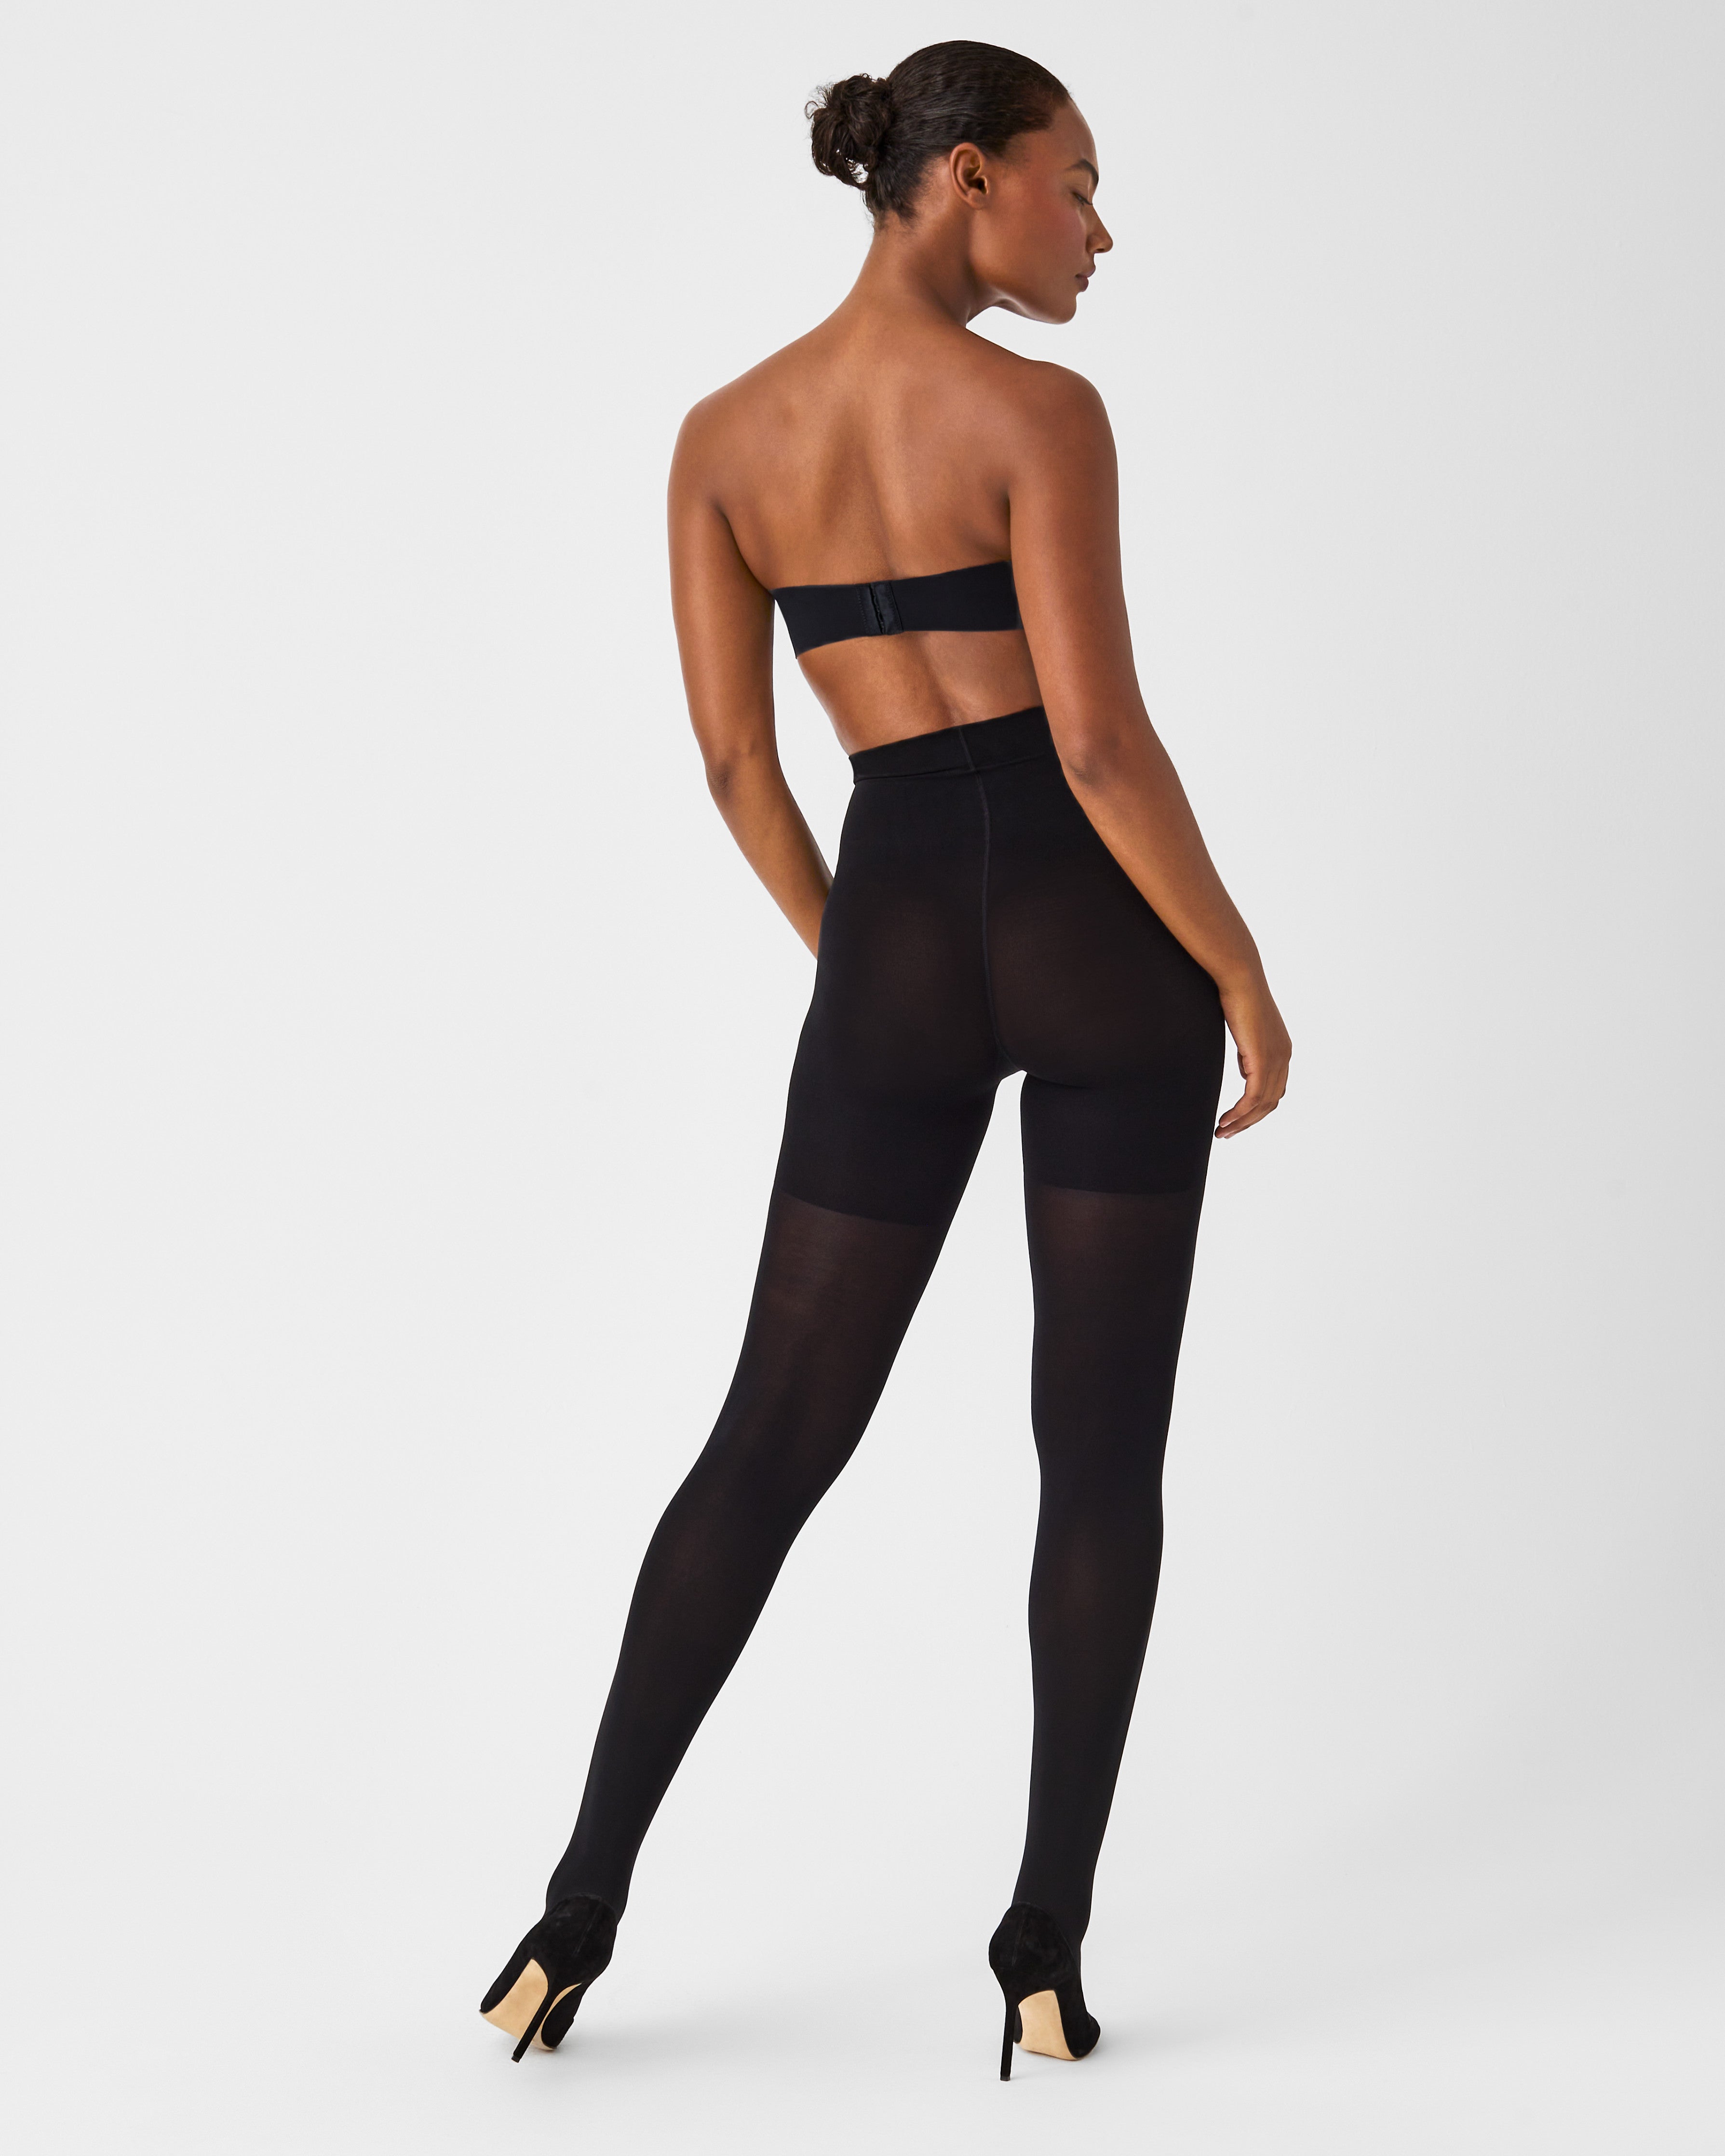 ASSETS by SPANX Women's High-Waist Shaping Tights - Black 3 1 ct